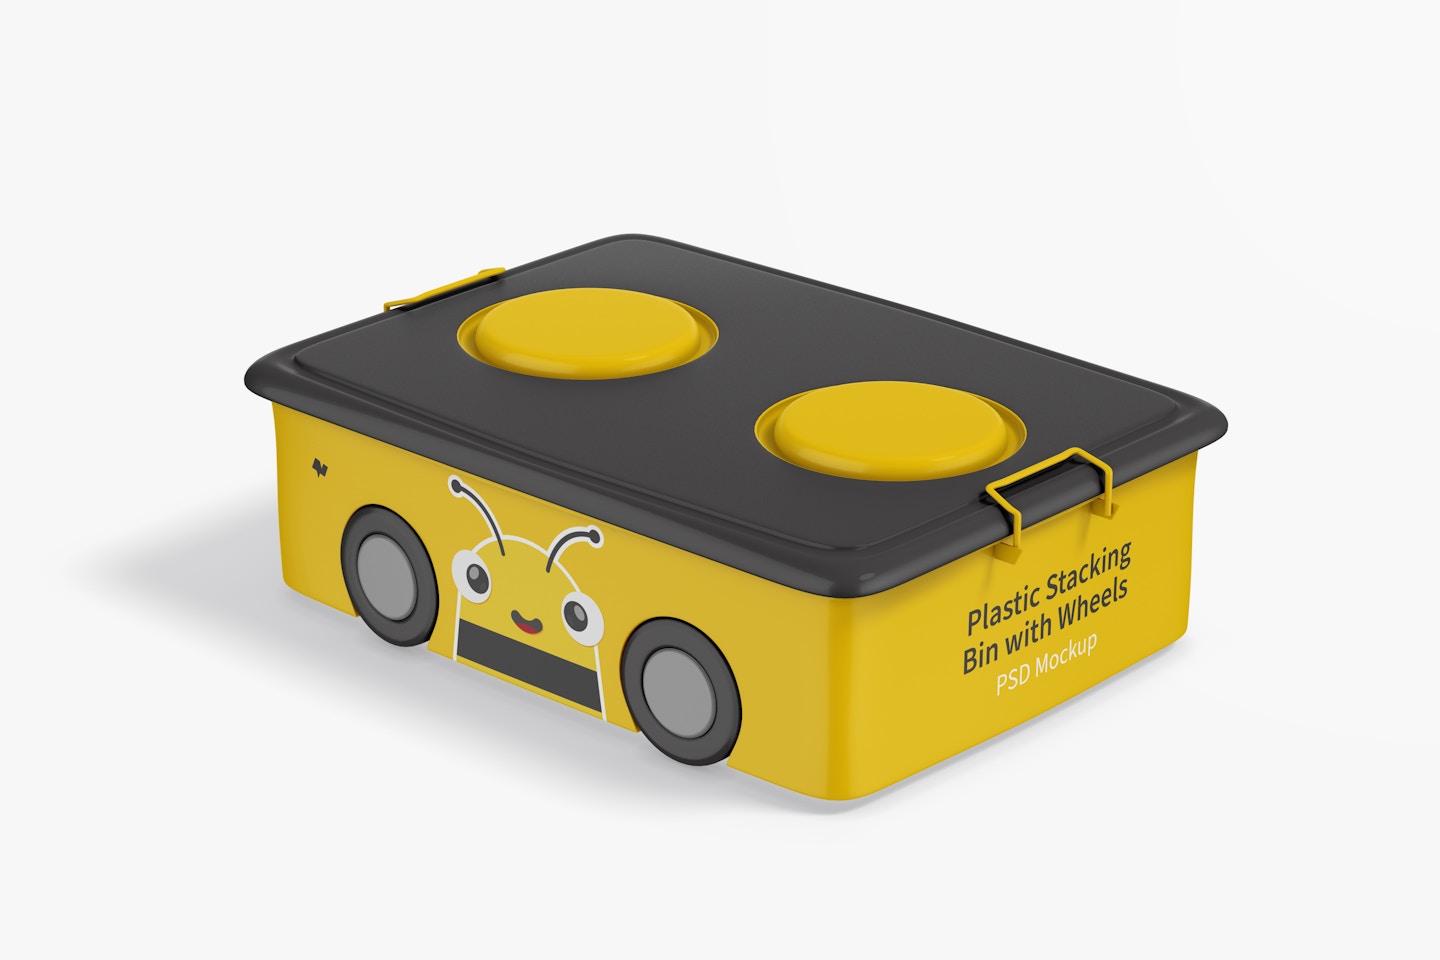 Small Plastic Stacking Bin with Wheels Mockup